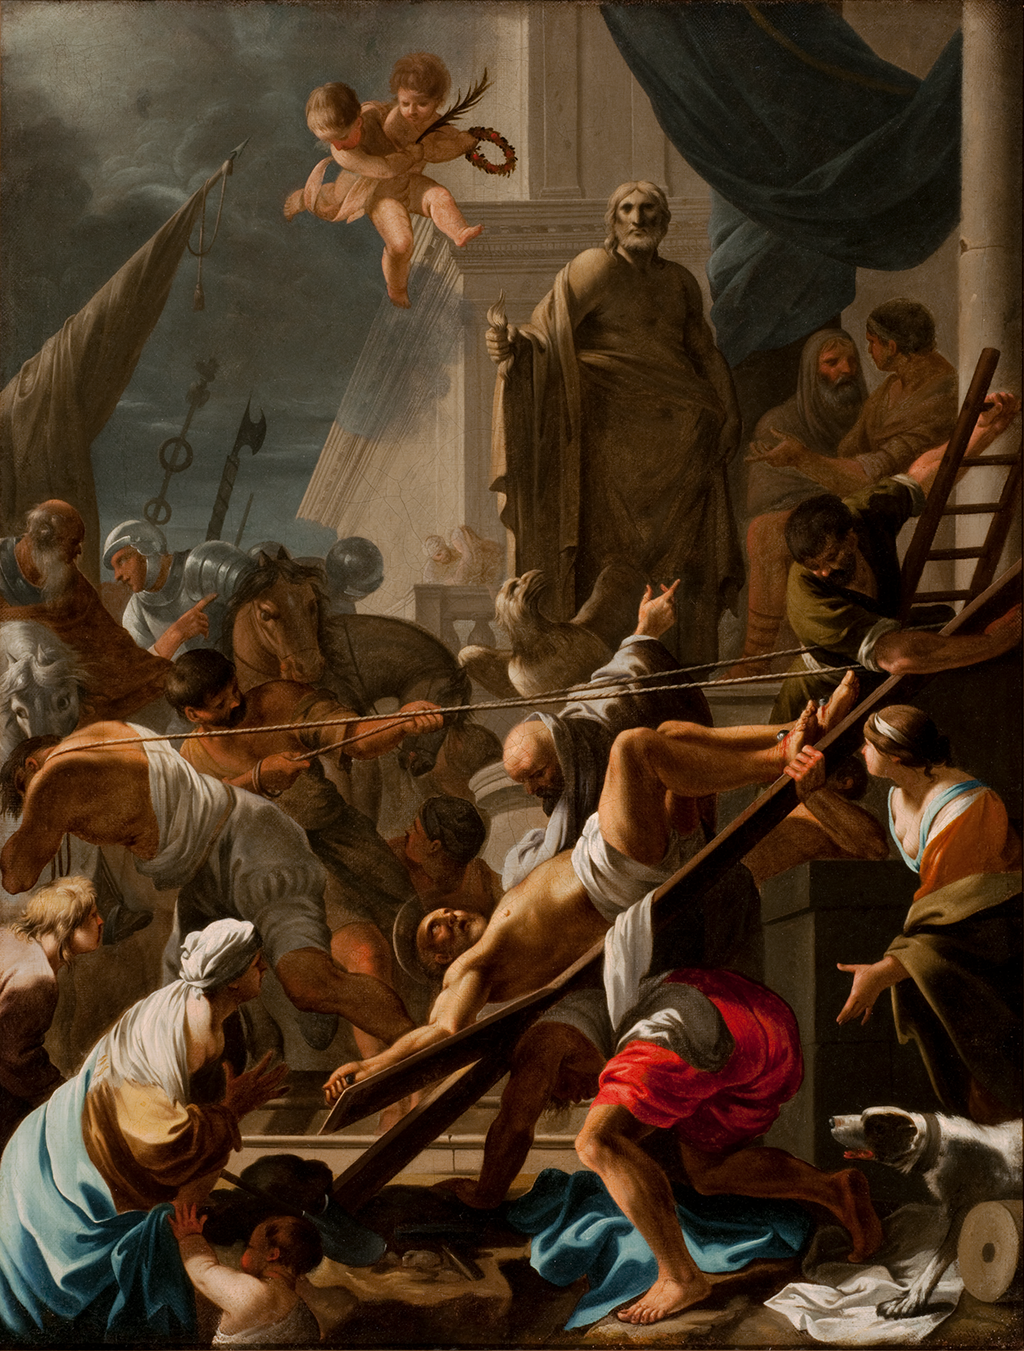 A painting depicting two people pulling on ropes that are attached to a large wooden cross which a man is bound to. Surrounding them is a crowd mixed with people of various ages. Two floating babies and a statue of a man stand over the crowd. In the background, there is a massive geometric structure.